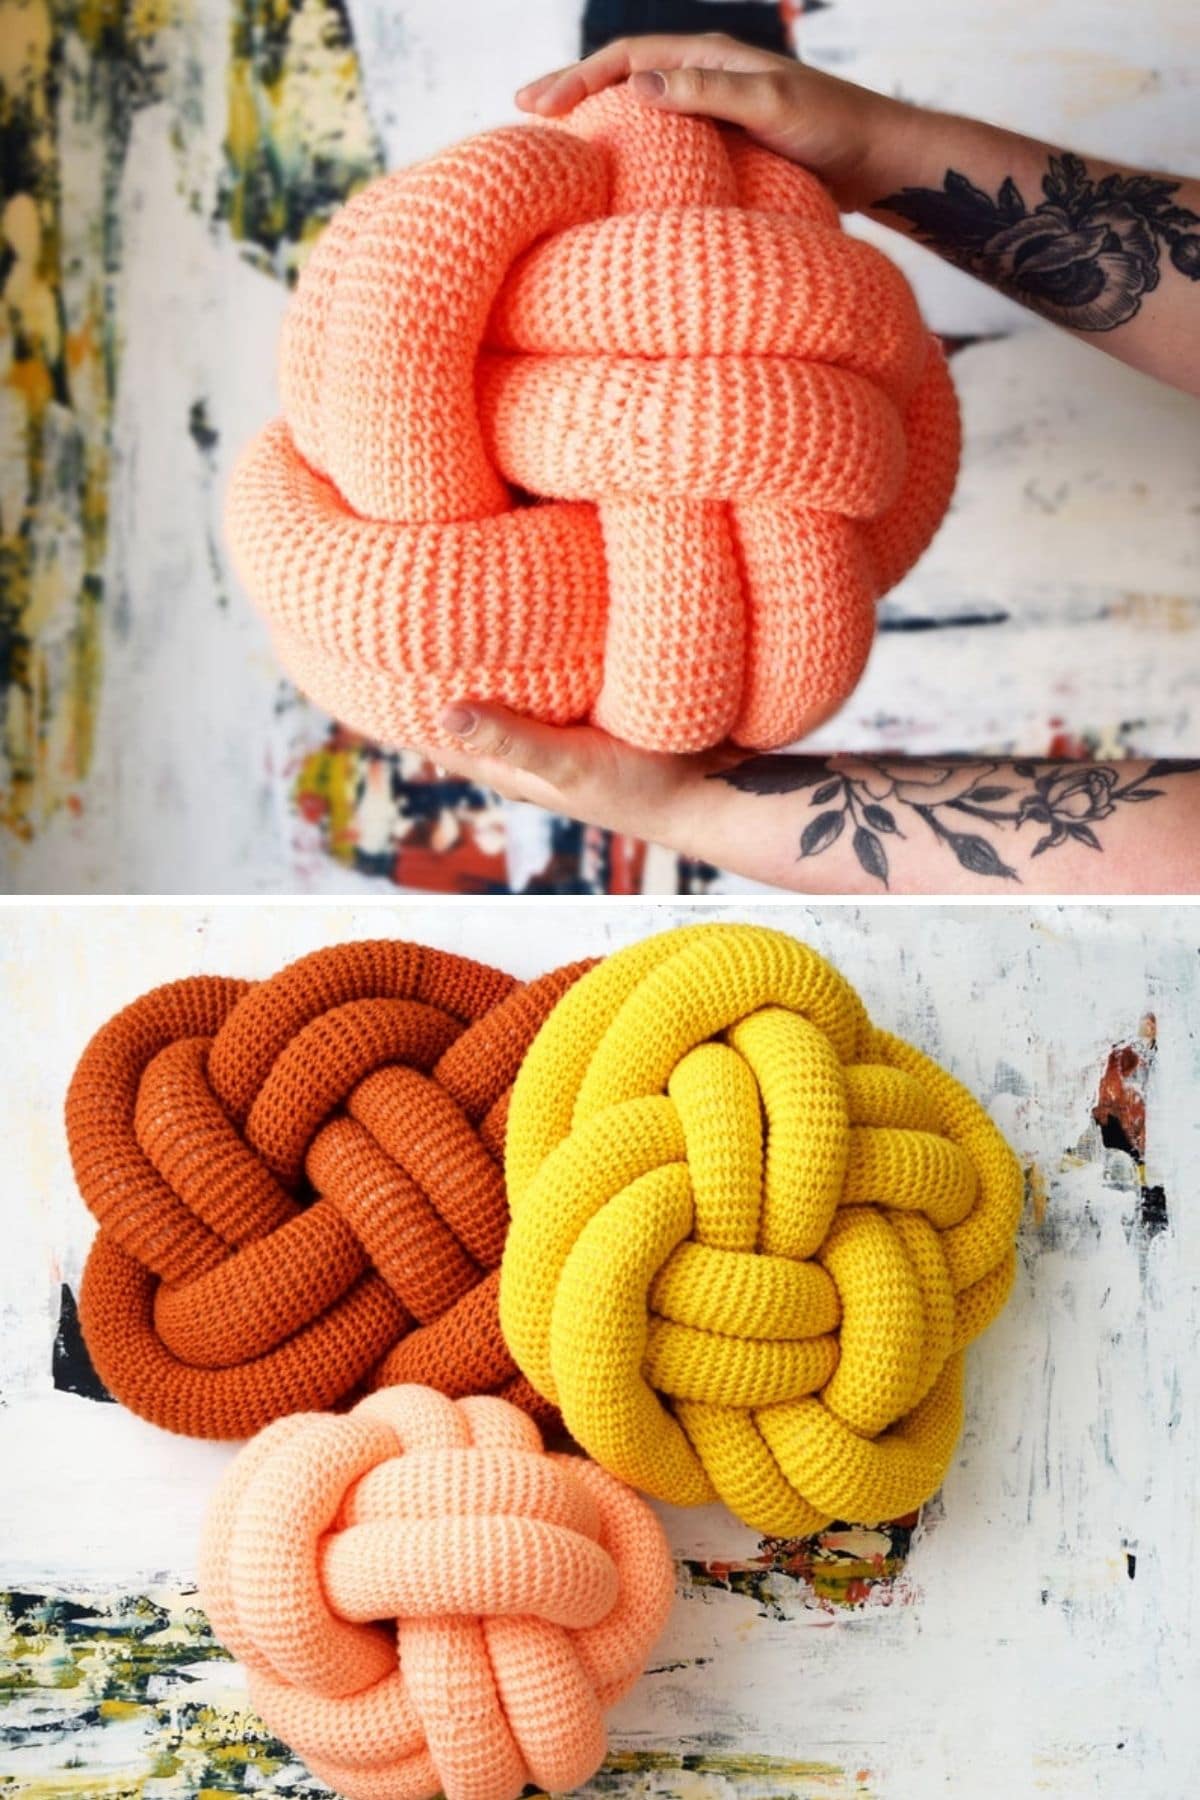 Peach orange and yellow knot pillows